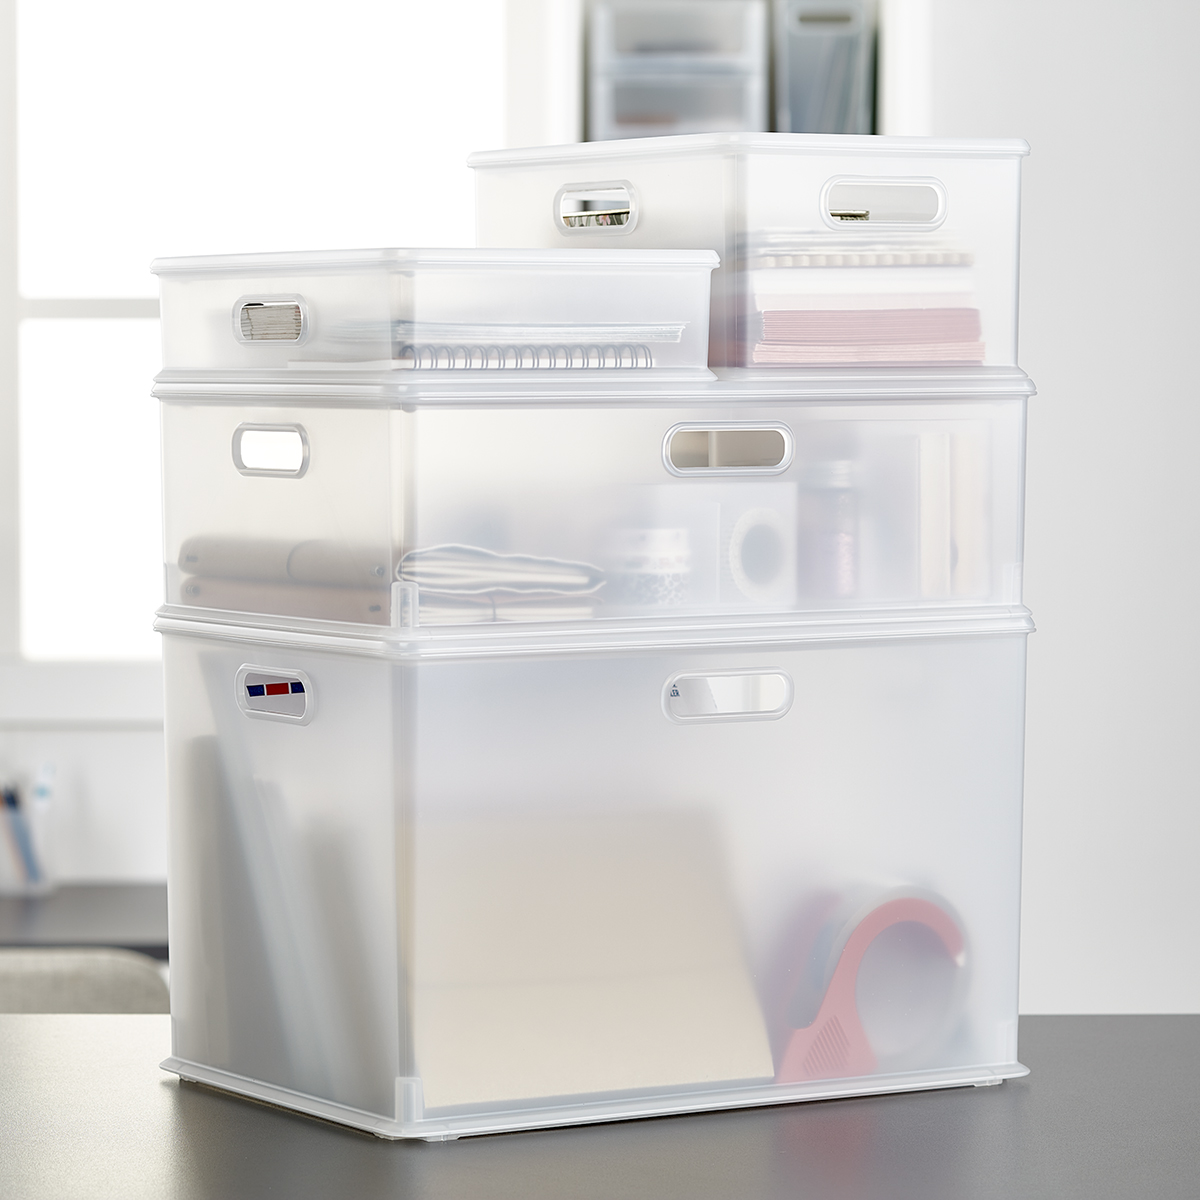 https://www.containerstore.com/catalogimages/434694/10079393g_Shimo_storage_bins.jpg